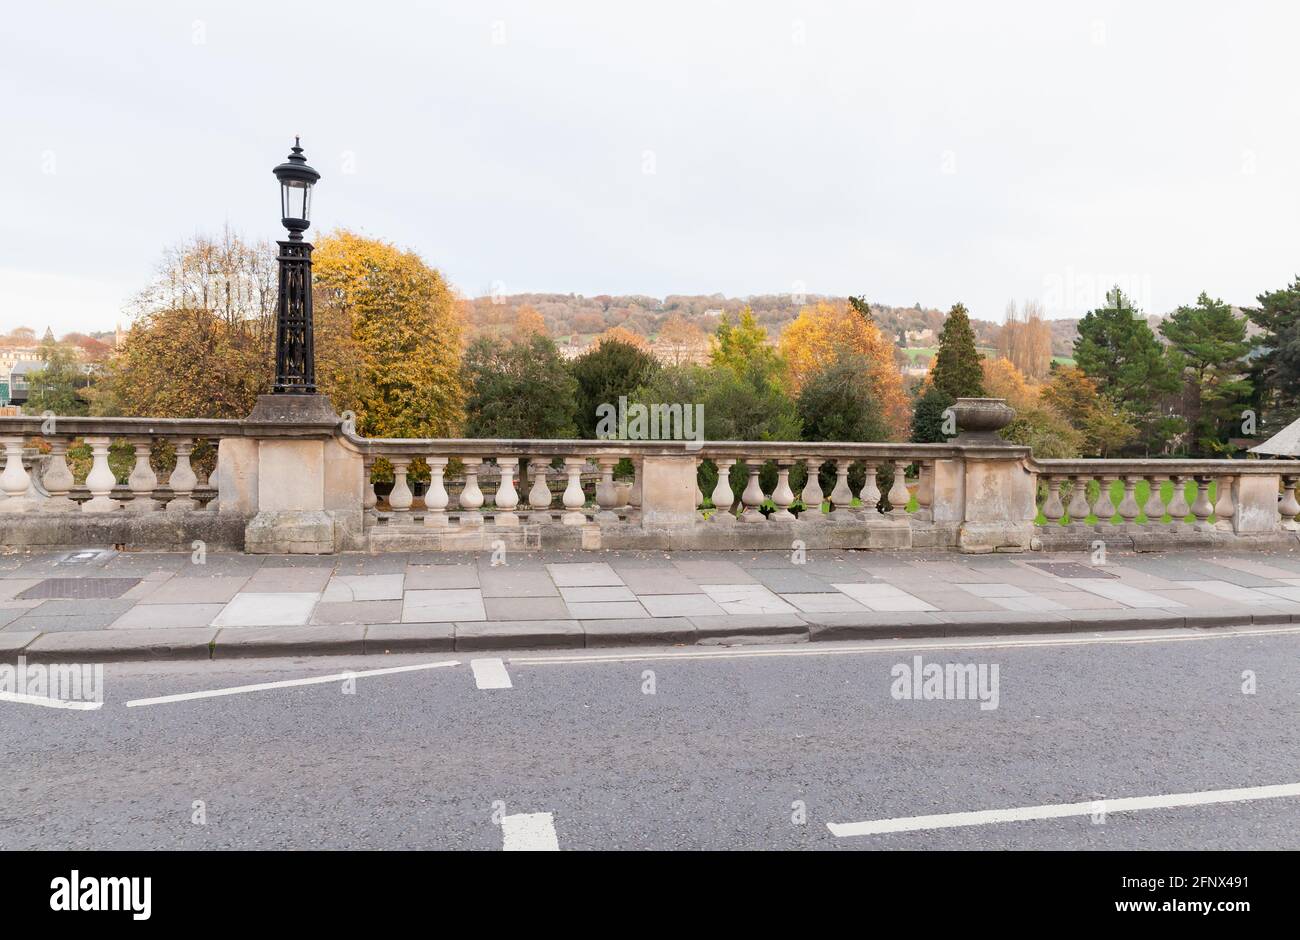 Grand Parade view with vintage street lamp and stone railings. Bath, Somerset. United Kingdom Stock Photo